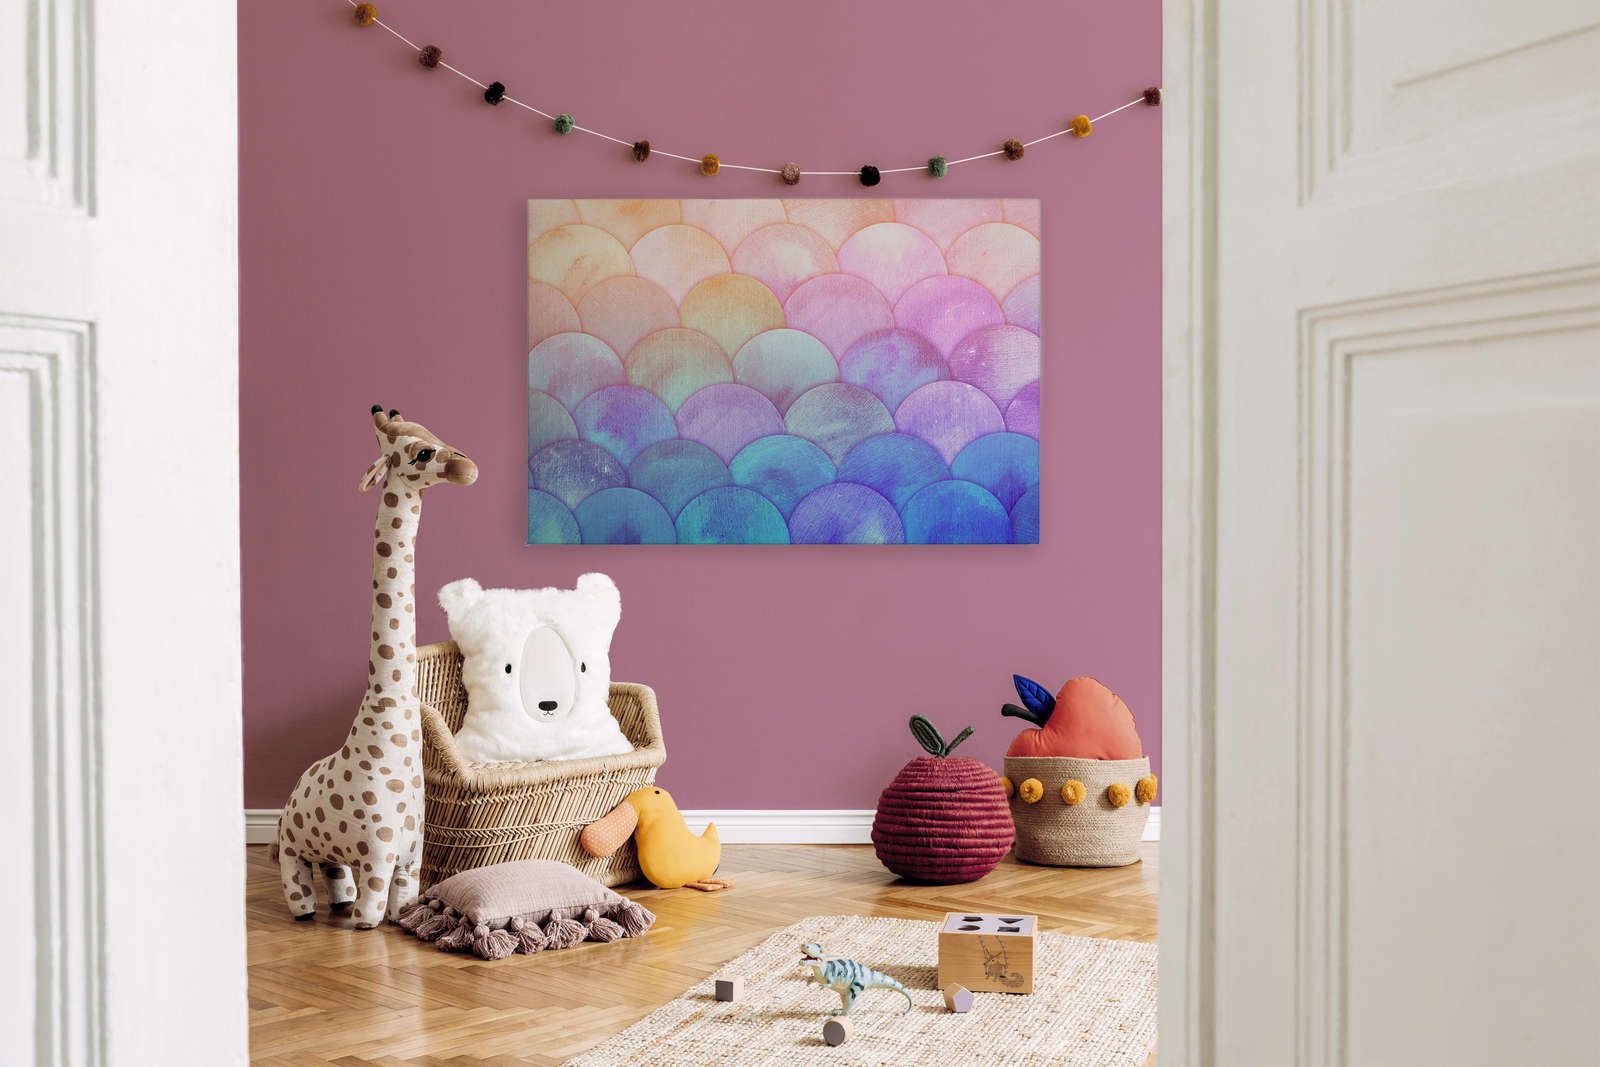             Canvas with fish scale pattern - 120 cm x 80 cm
        